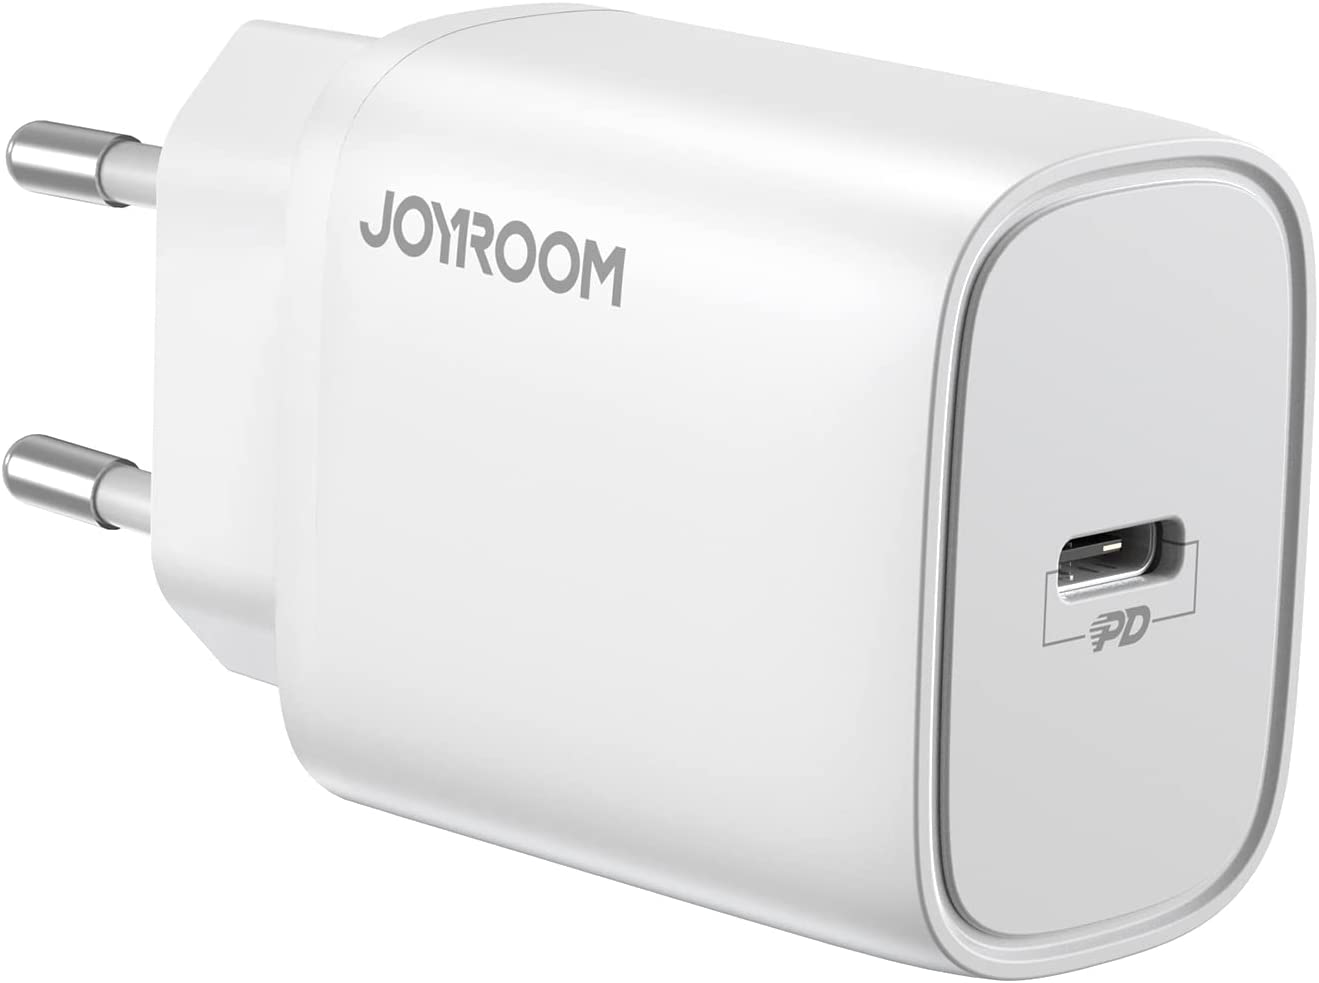 Joyroom Adapter 20 W Fast Charger L-P201